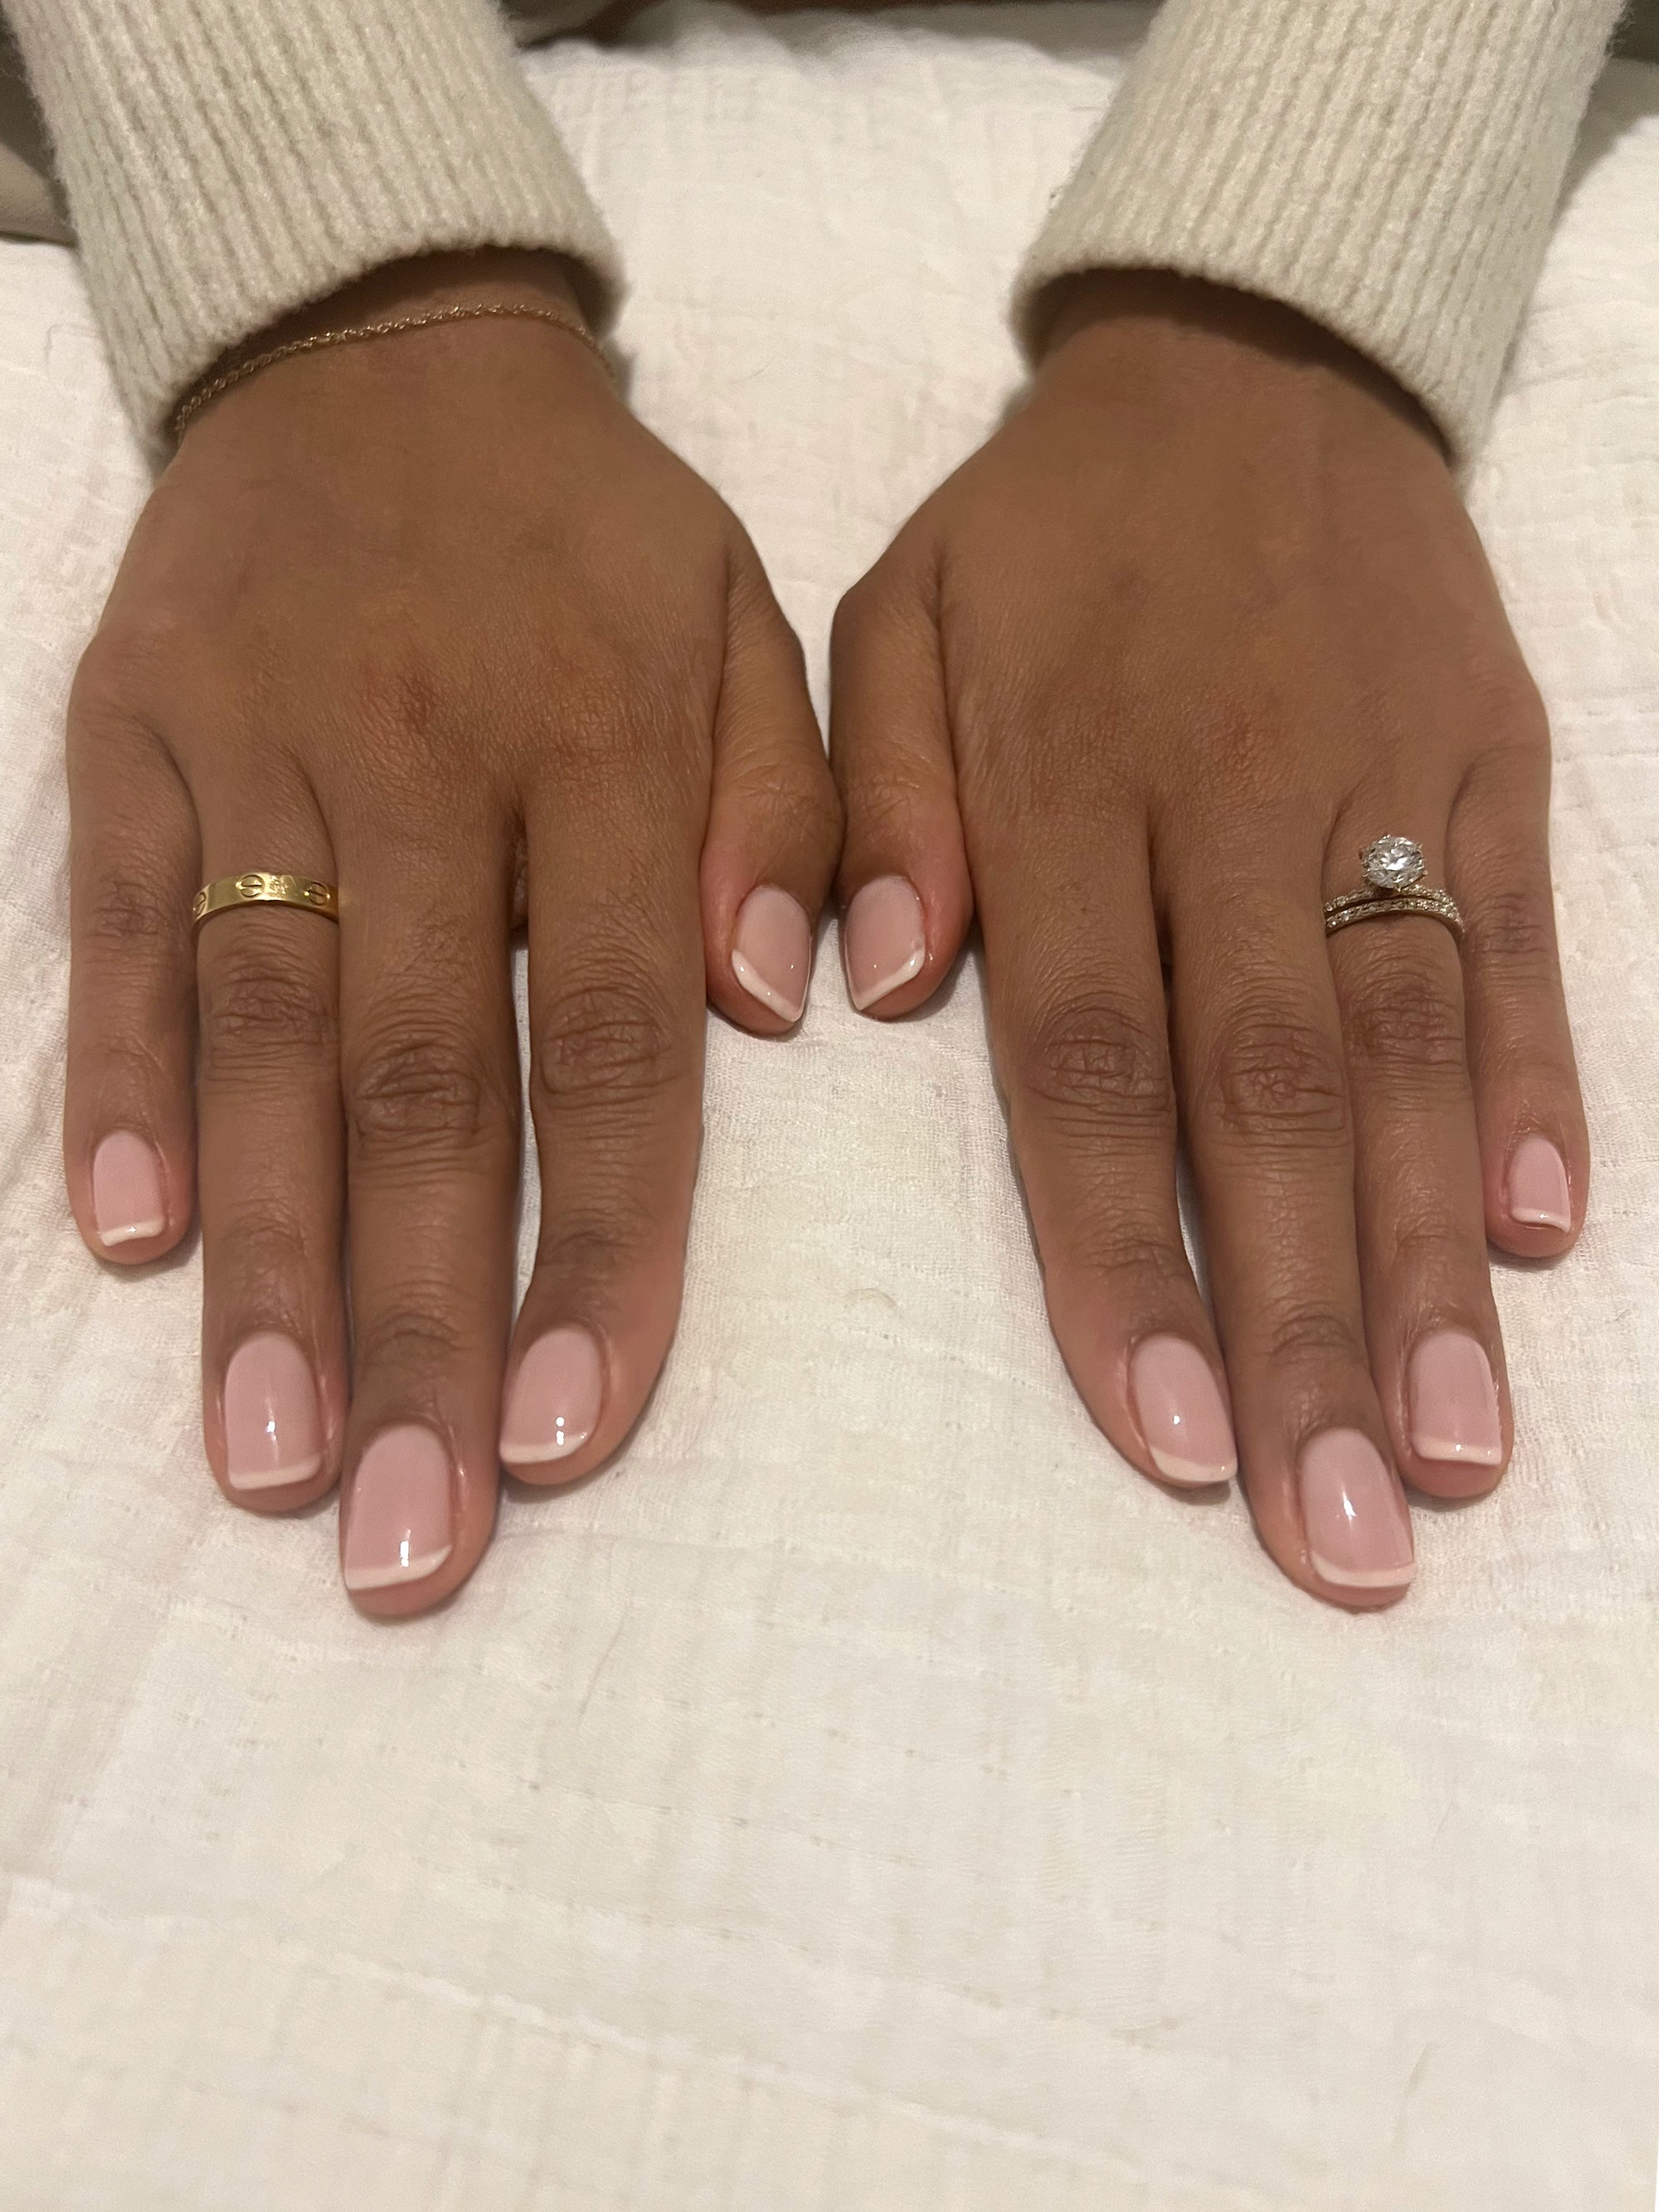 30 Colorful French Tip Manicure Ideas for 2024